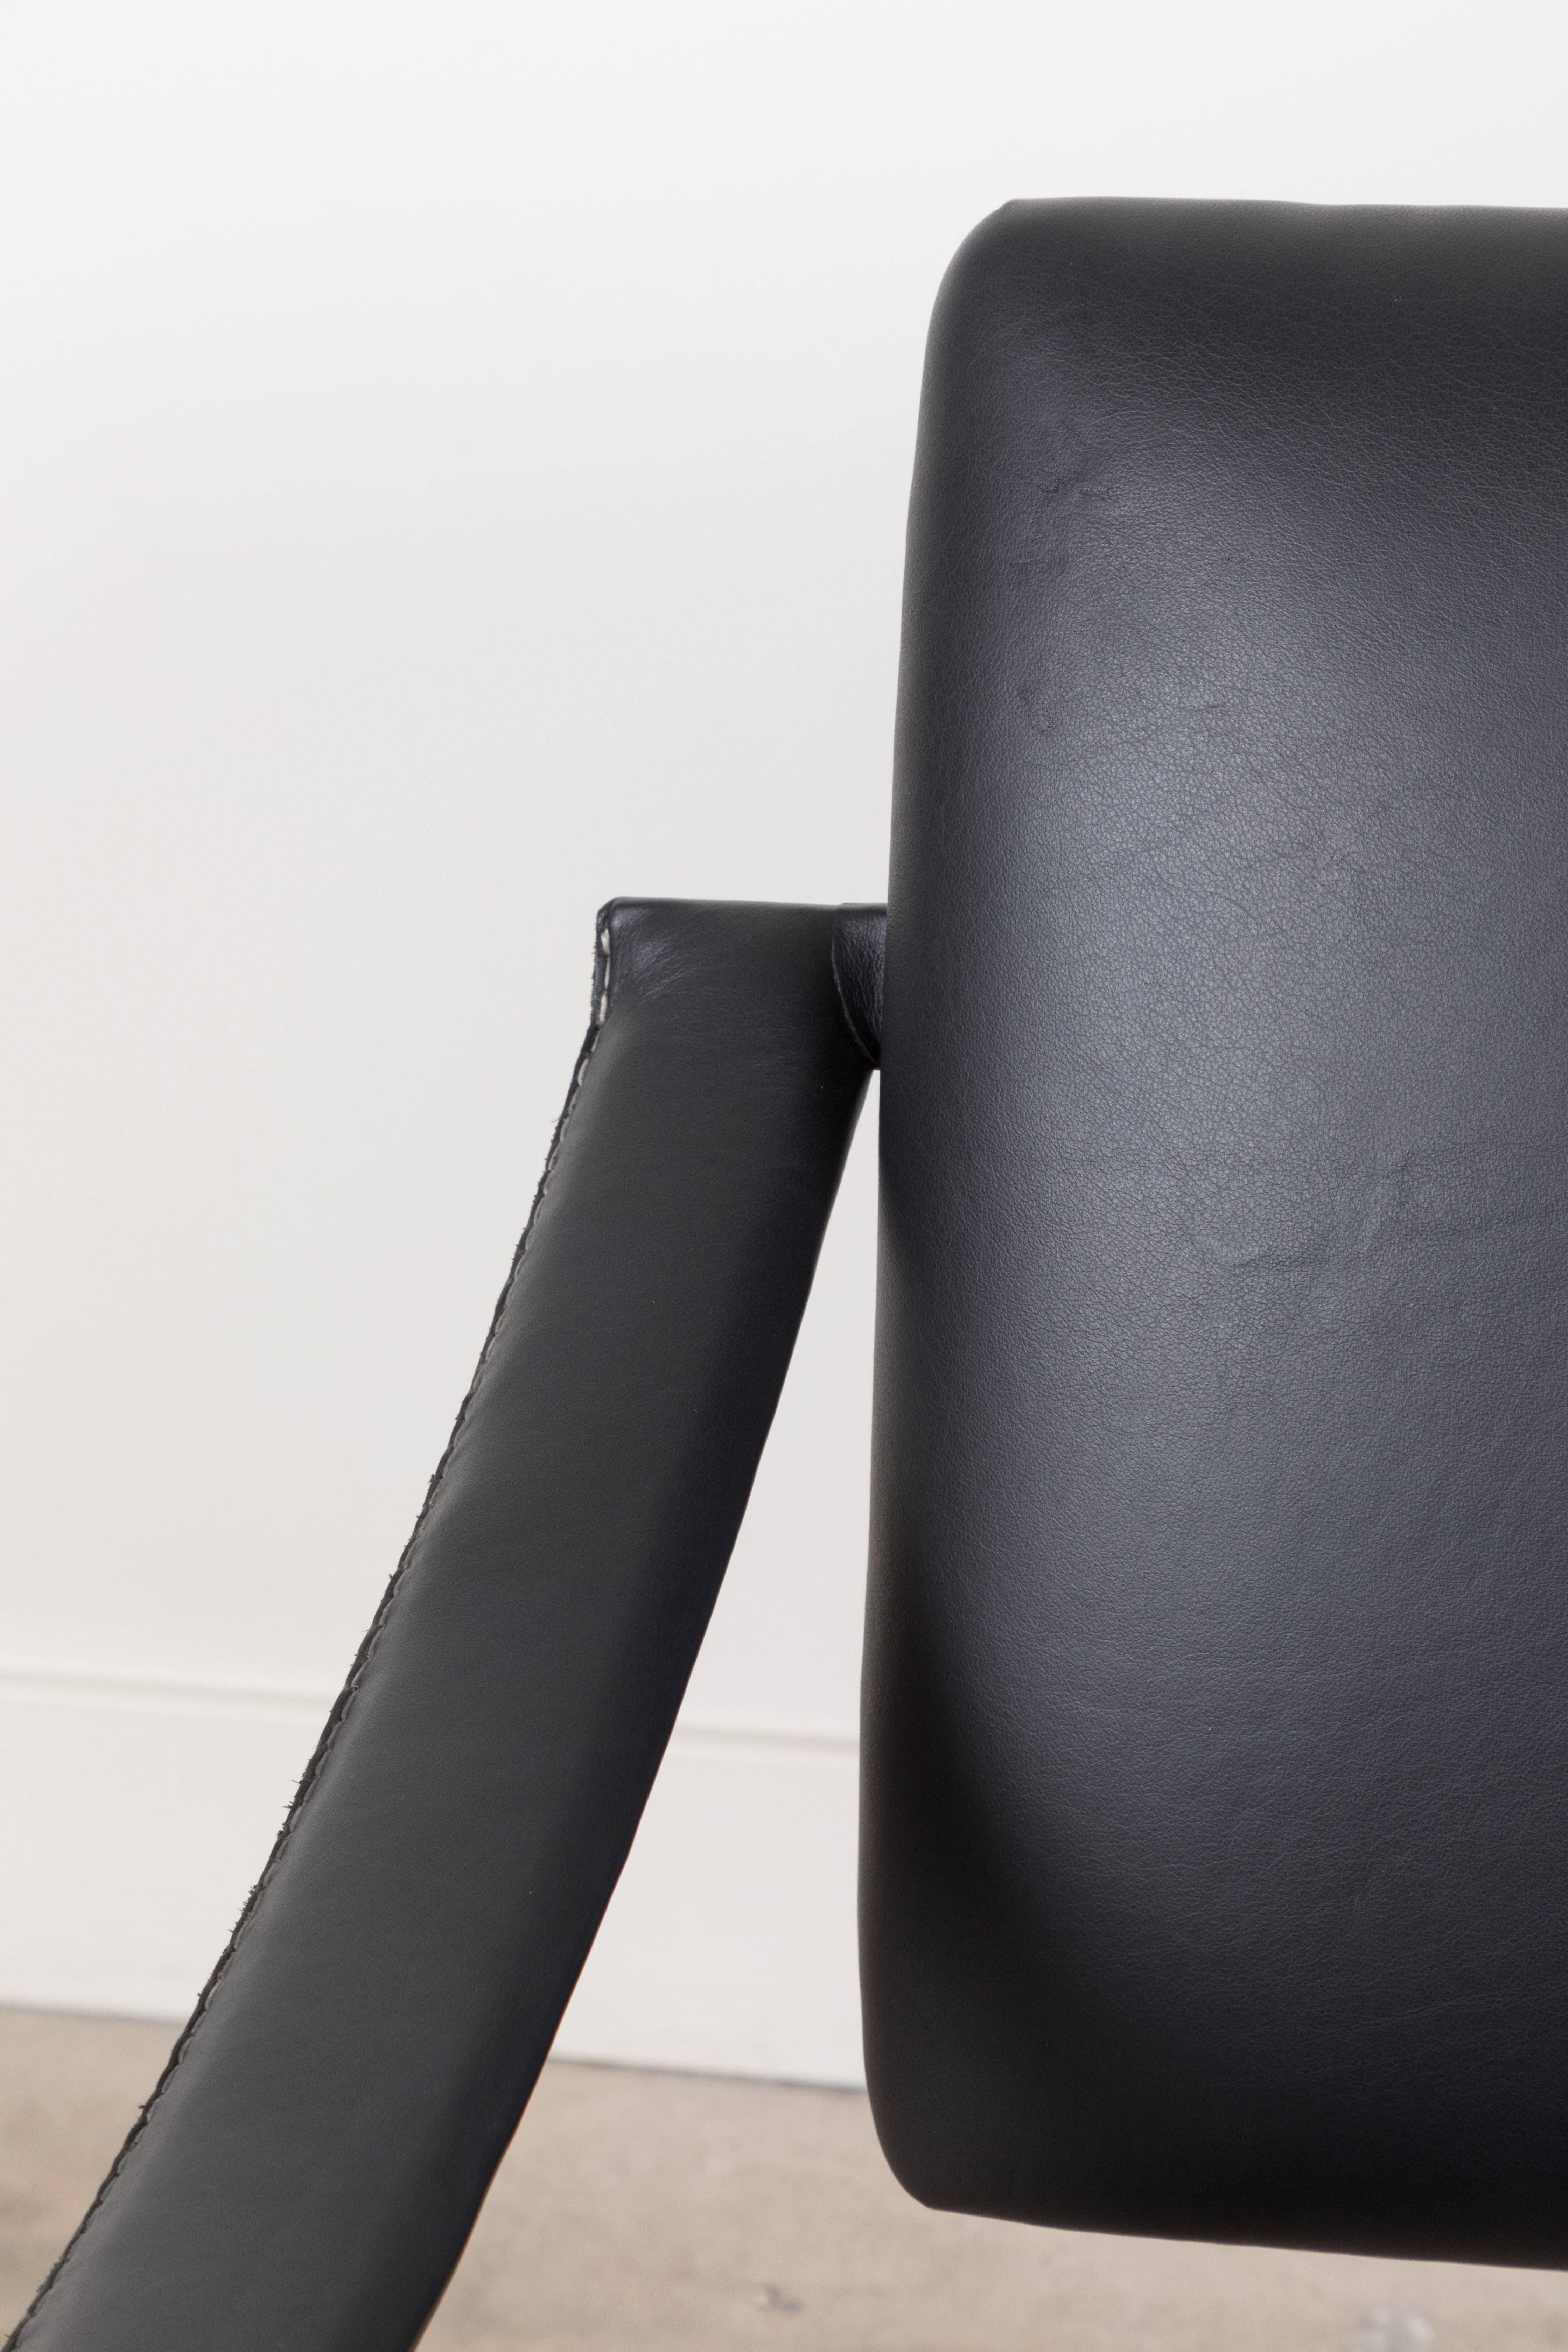 Black leather armchair by Jacques Adnet.